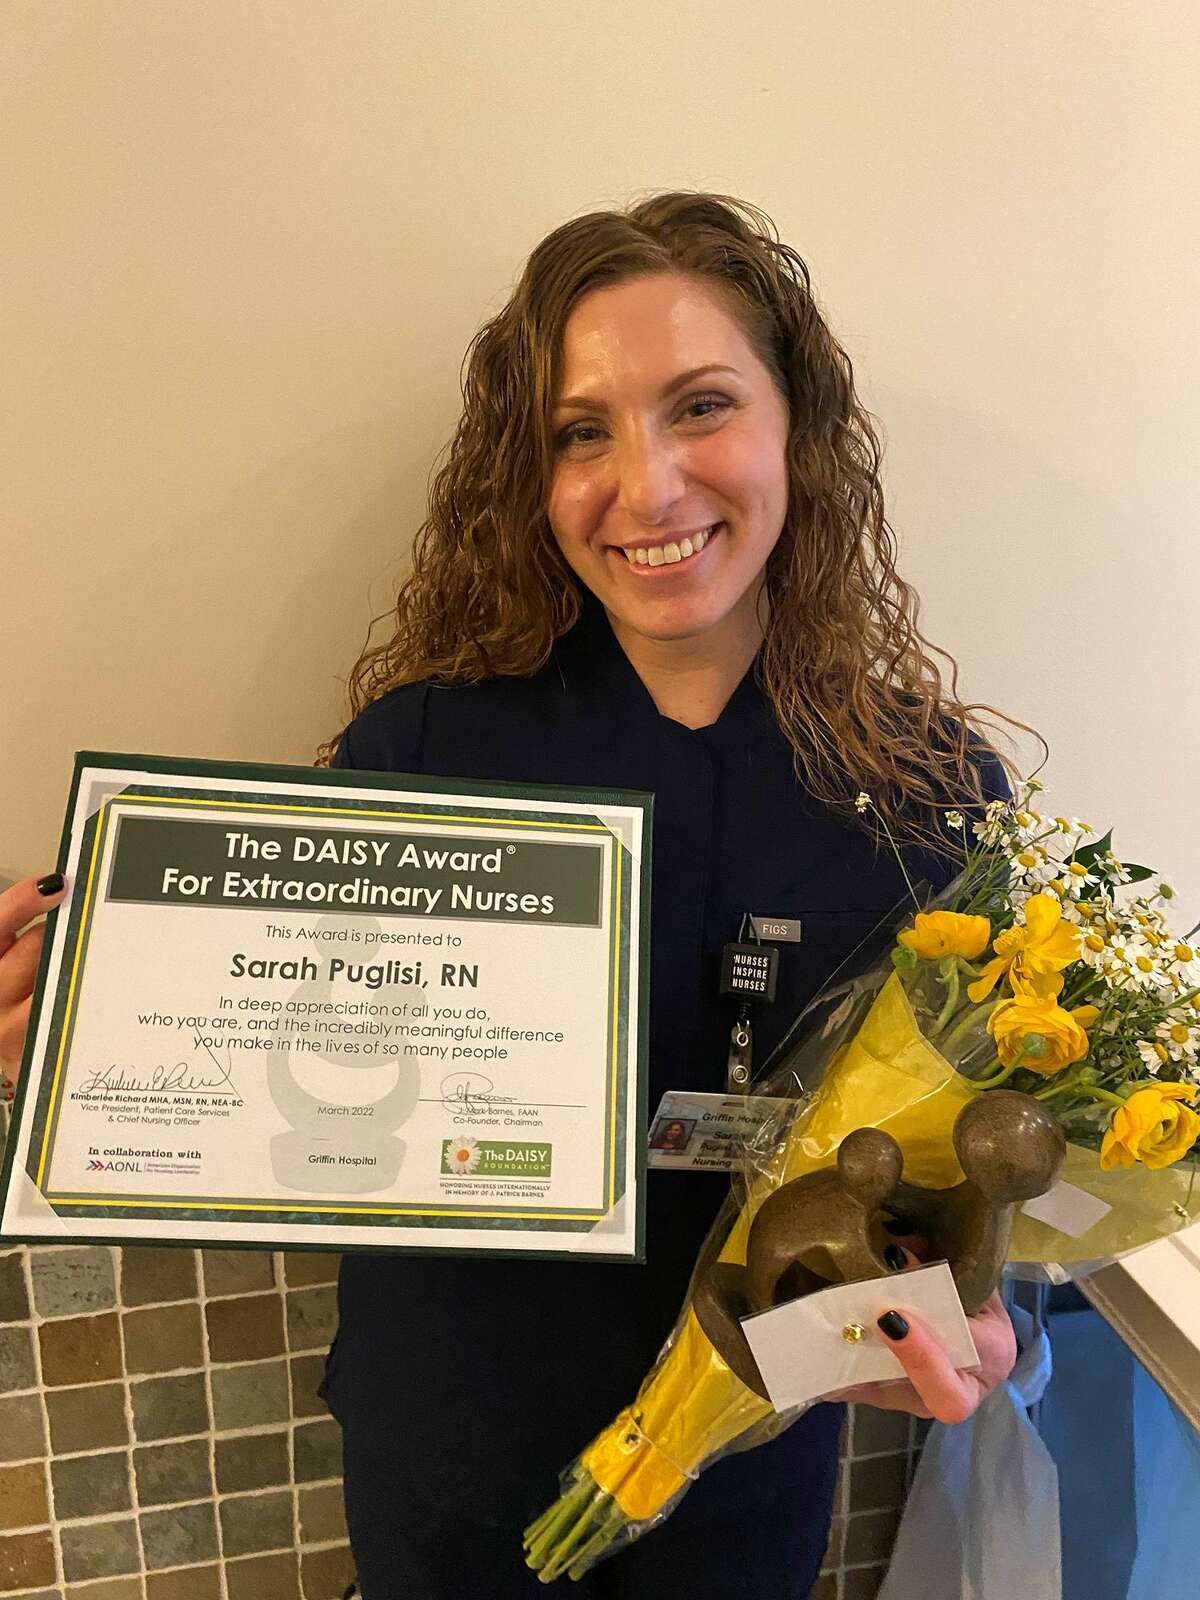 Griffin Health in Derby recently honored Tammy Piccolo, RN, and Sarah Puglisi, RN, pictured, both of Ansonia, and Susanne Festini, RN, of Shelton, with The DAISY Award for Extraordinary Nurses.